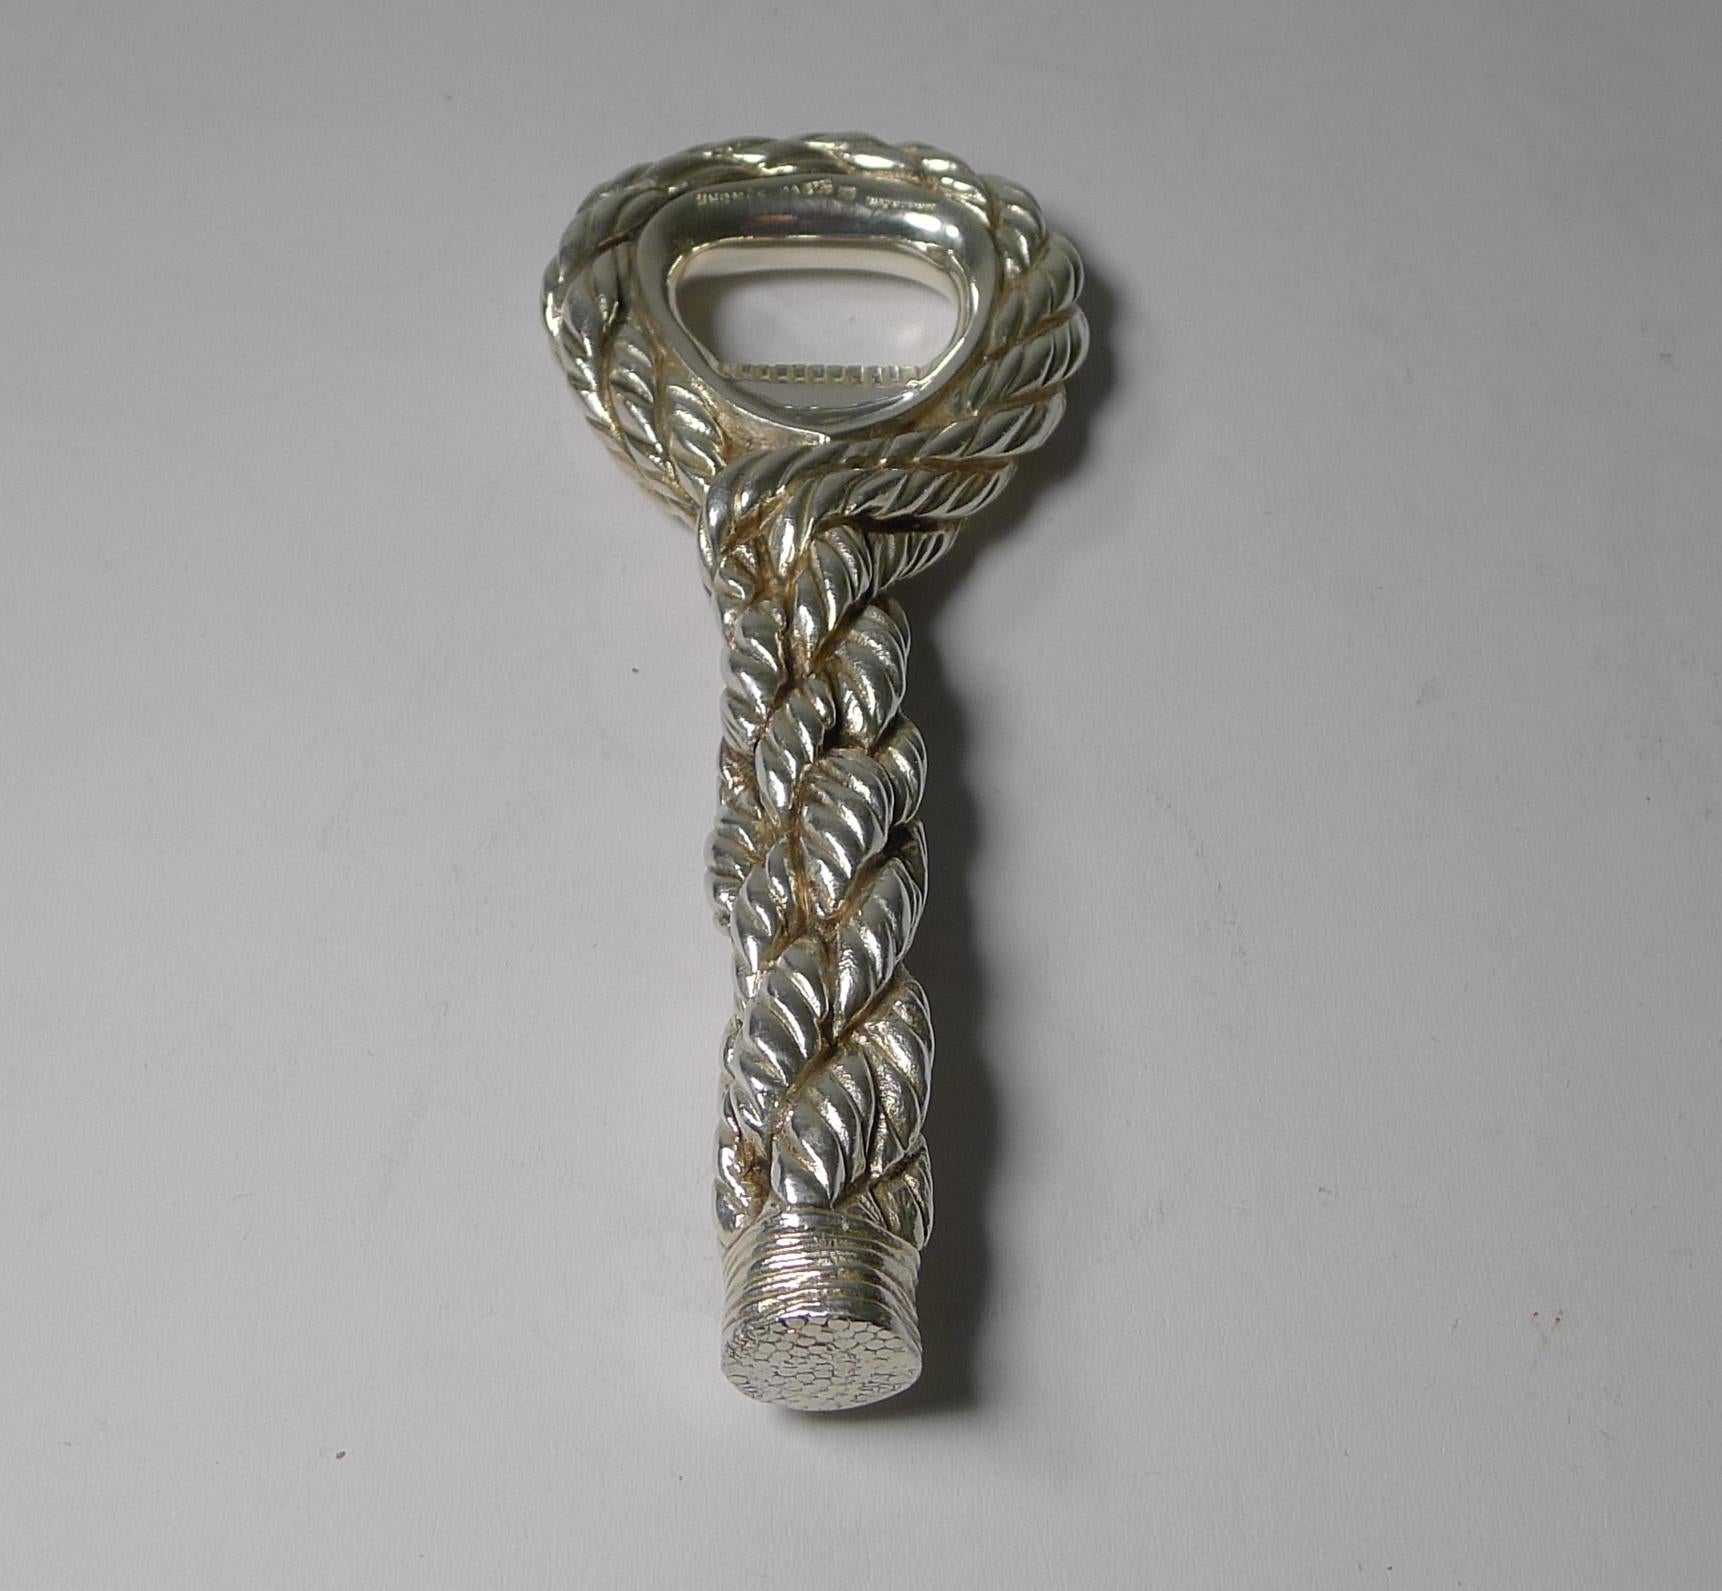 Mid-20th Century Hermes, Paris Cordage Bottle Opener in Silver Plate c.1960's For Sale